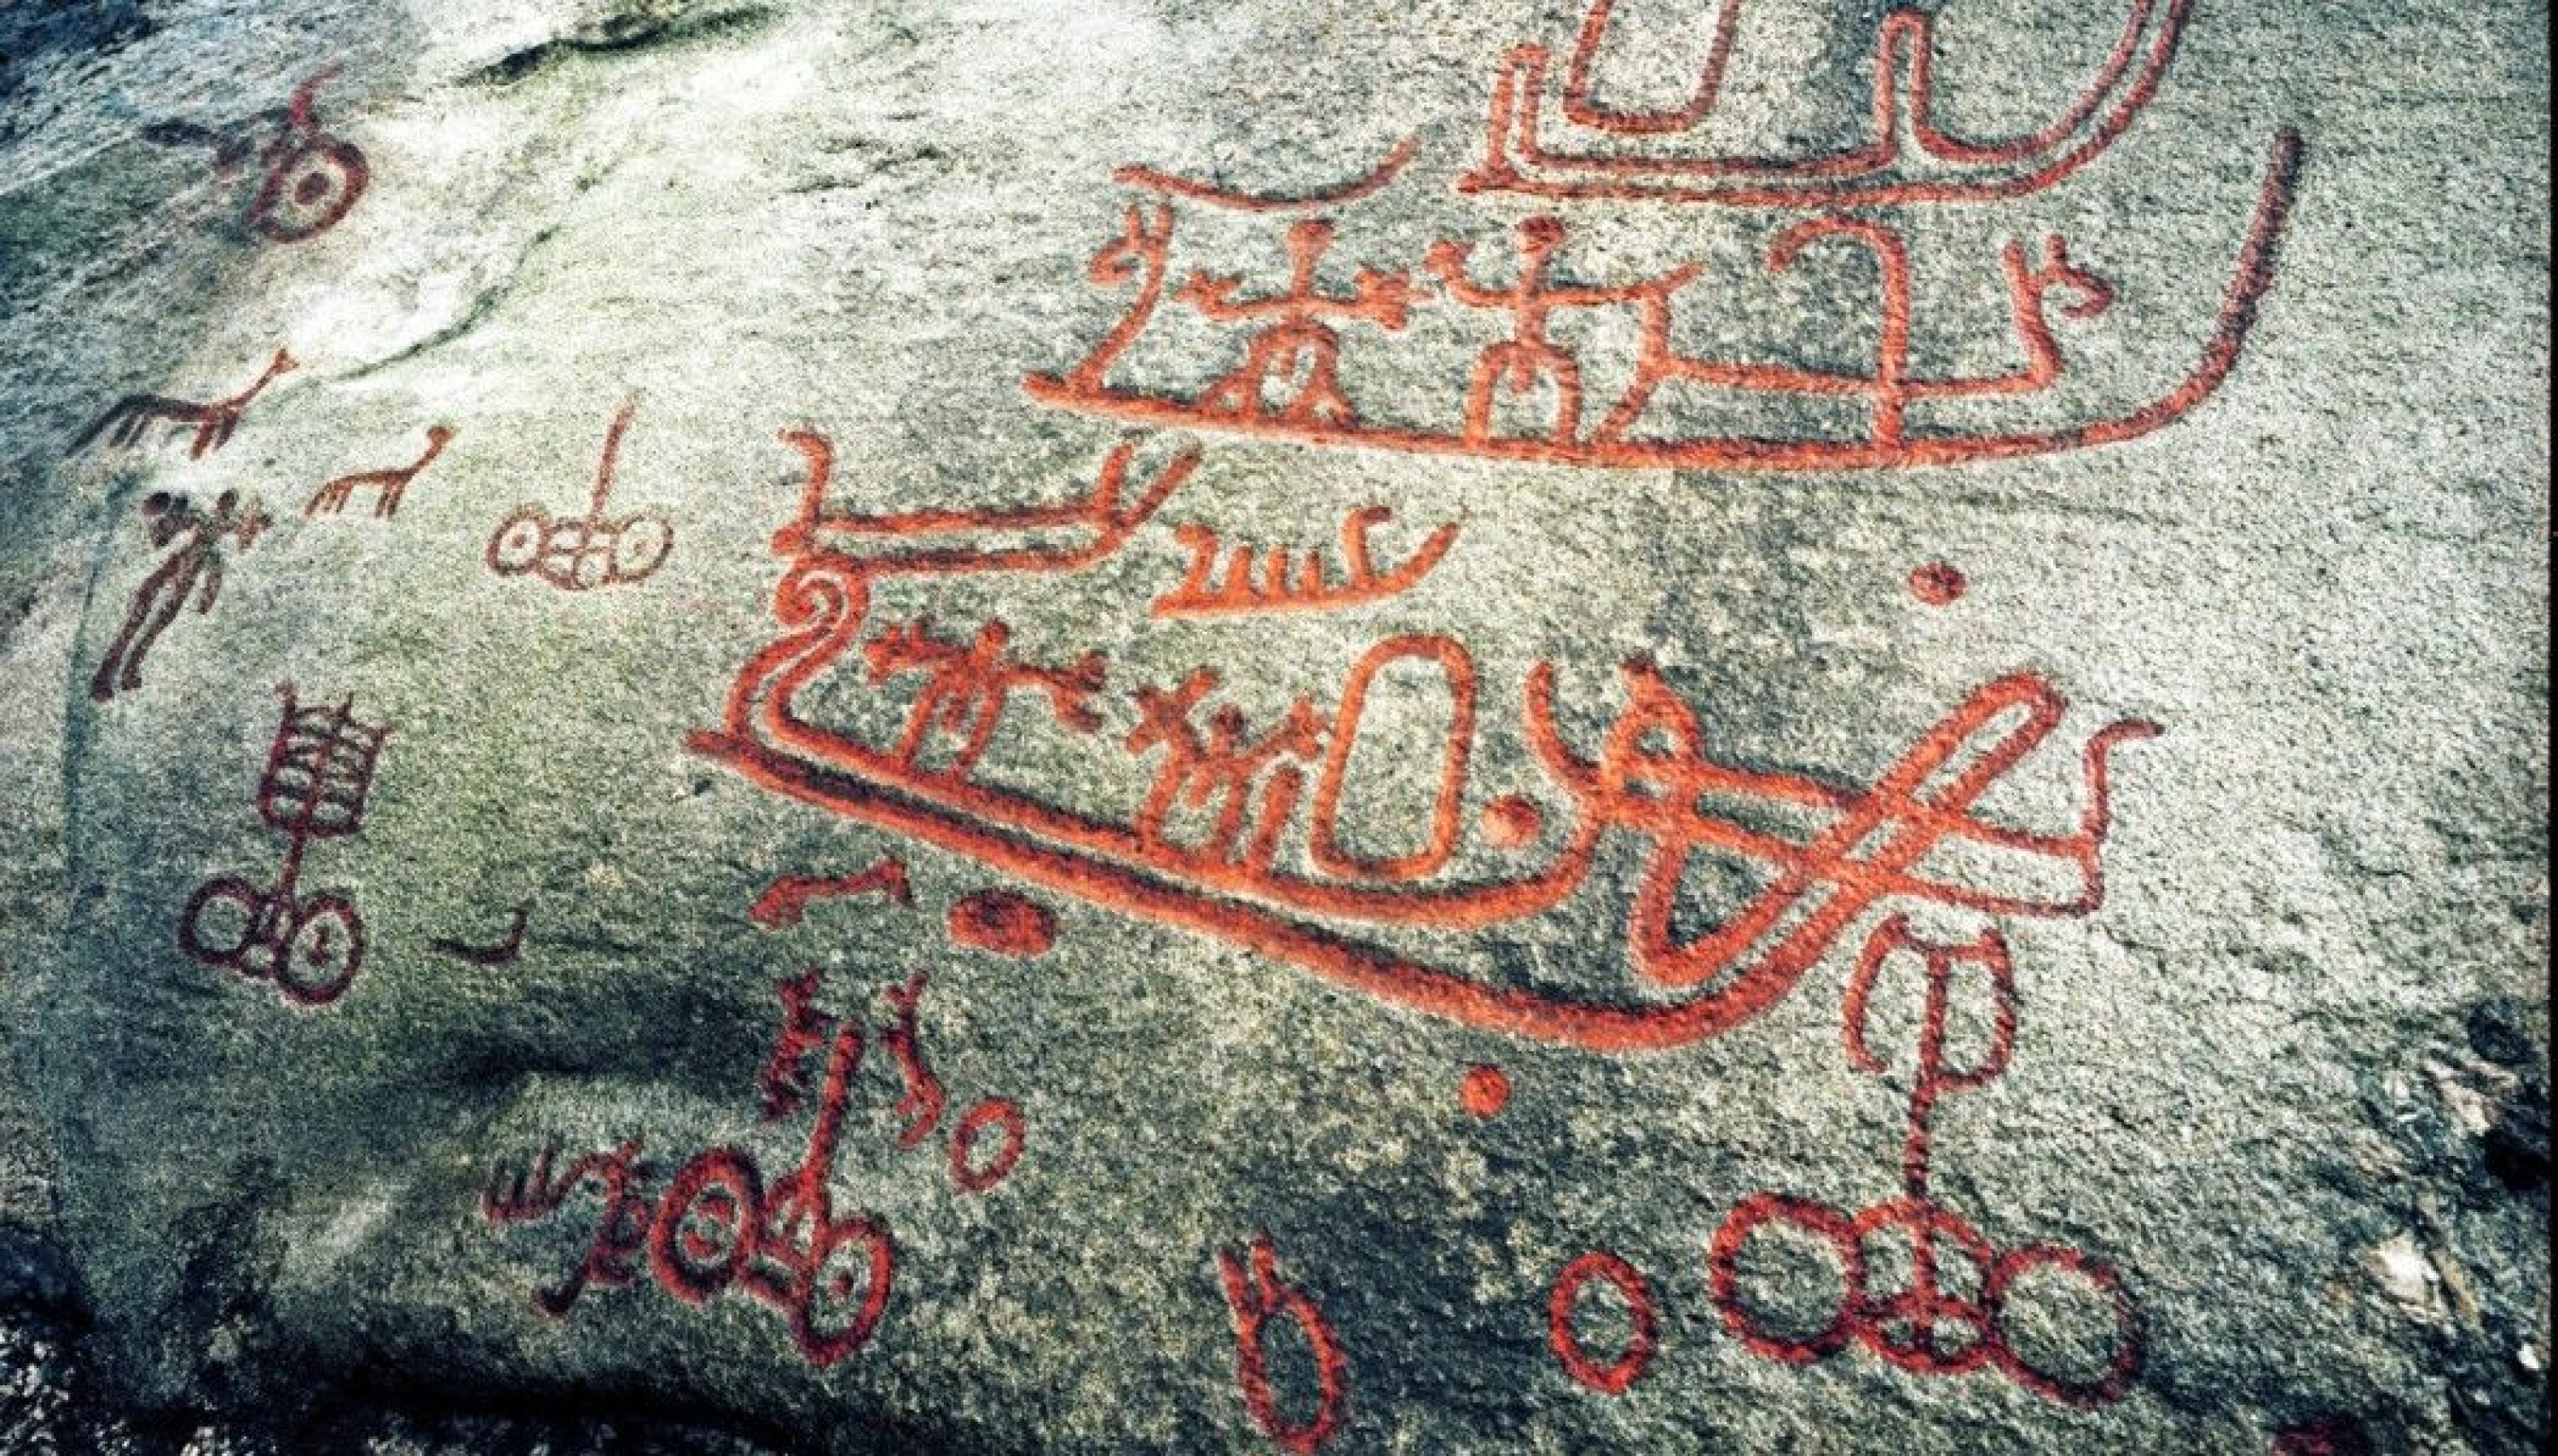 The petroglyphs in Begby just outside Fredrikstad, in southeastern Norway, clearly depict wagons pulled by animals. It’s a fairly clear message that people used wagons here as early as 3000 years ago.